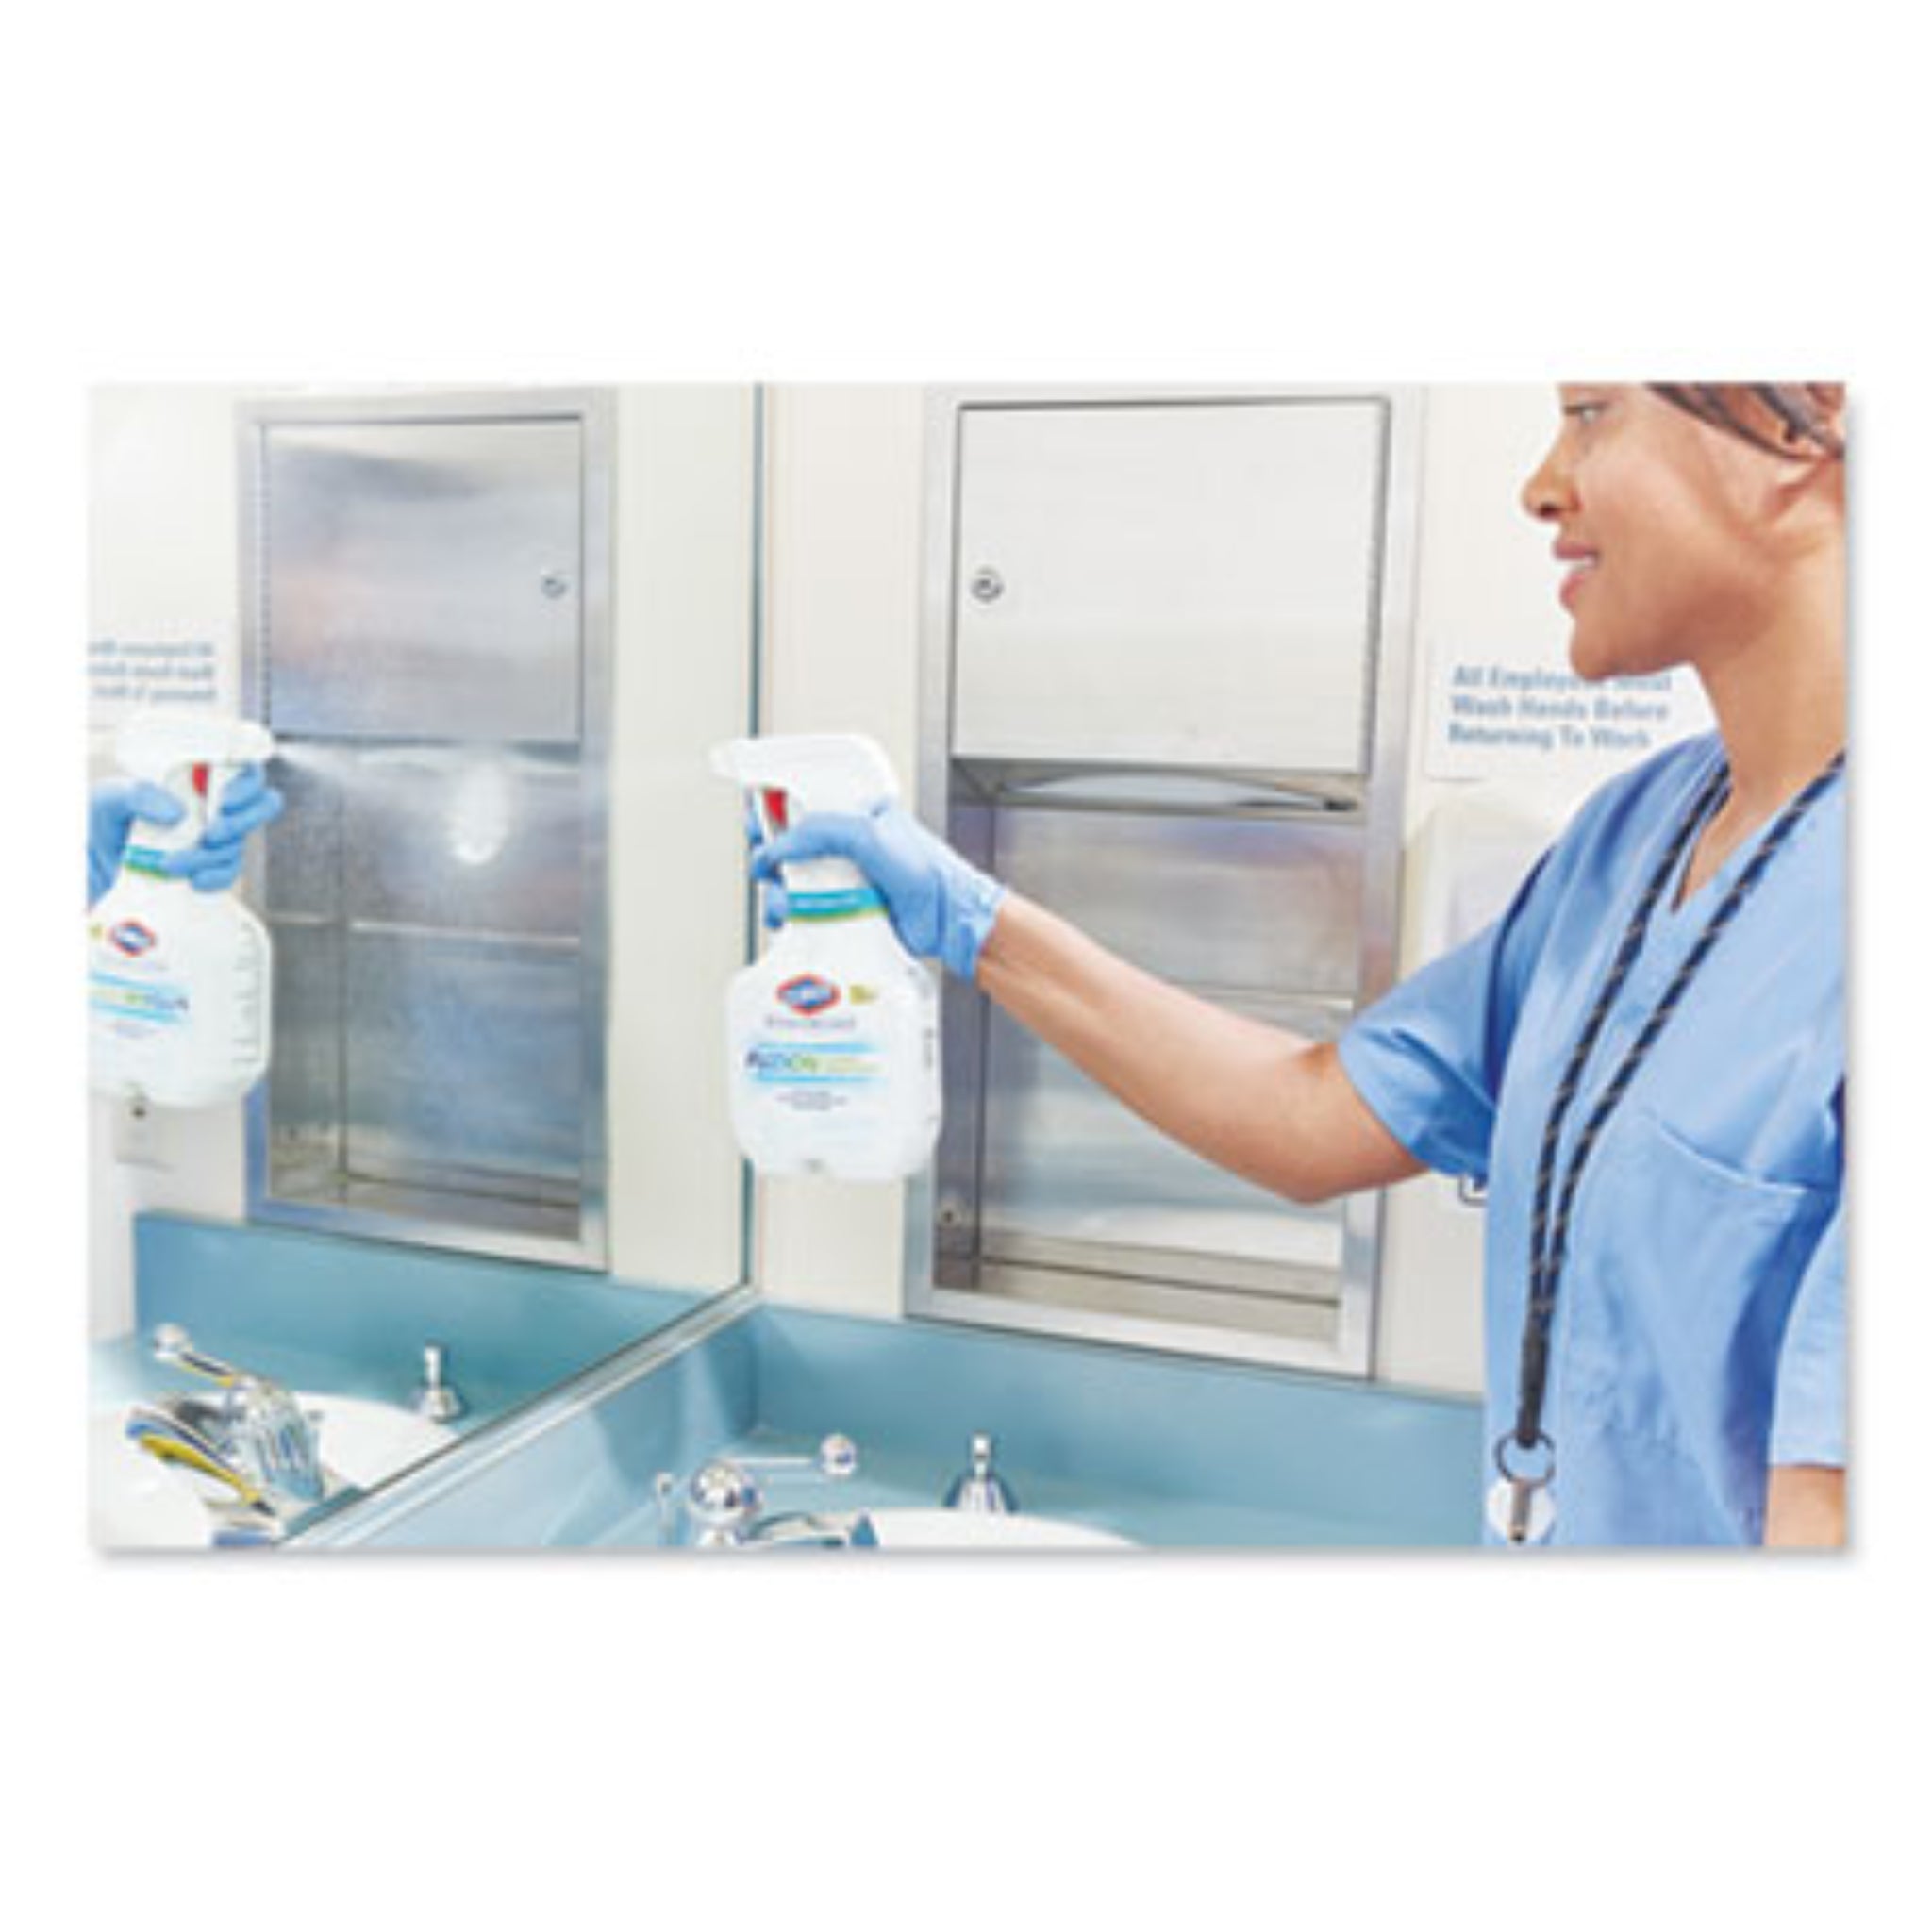 CLOROX SALES CO. CLO31478 Fuzion Cleaner Disinfectant, Application